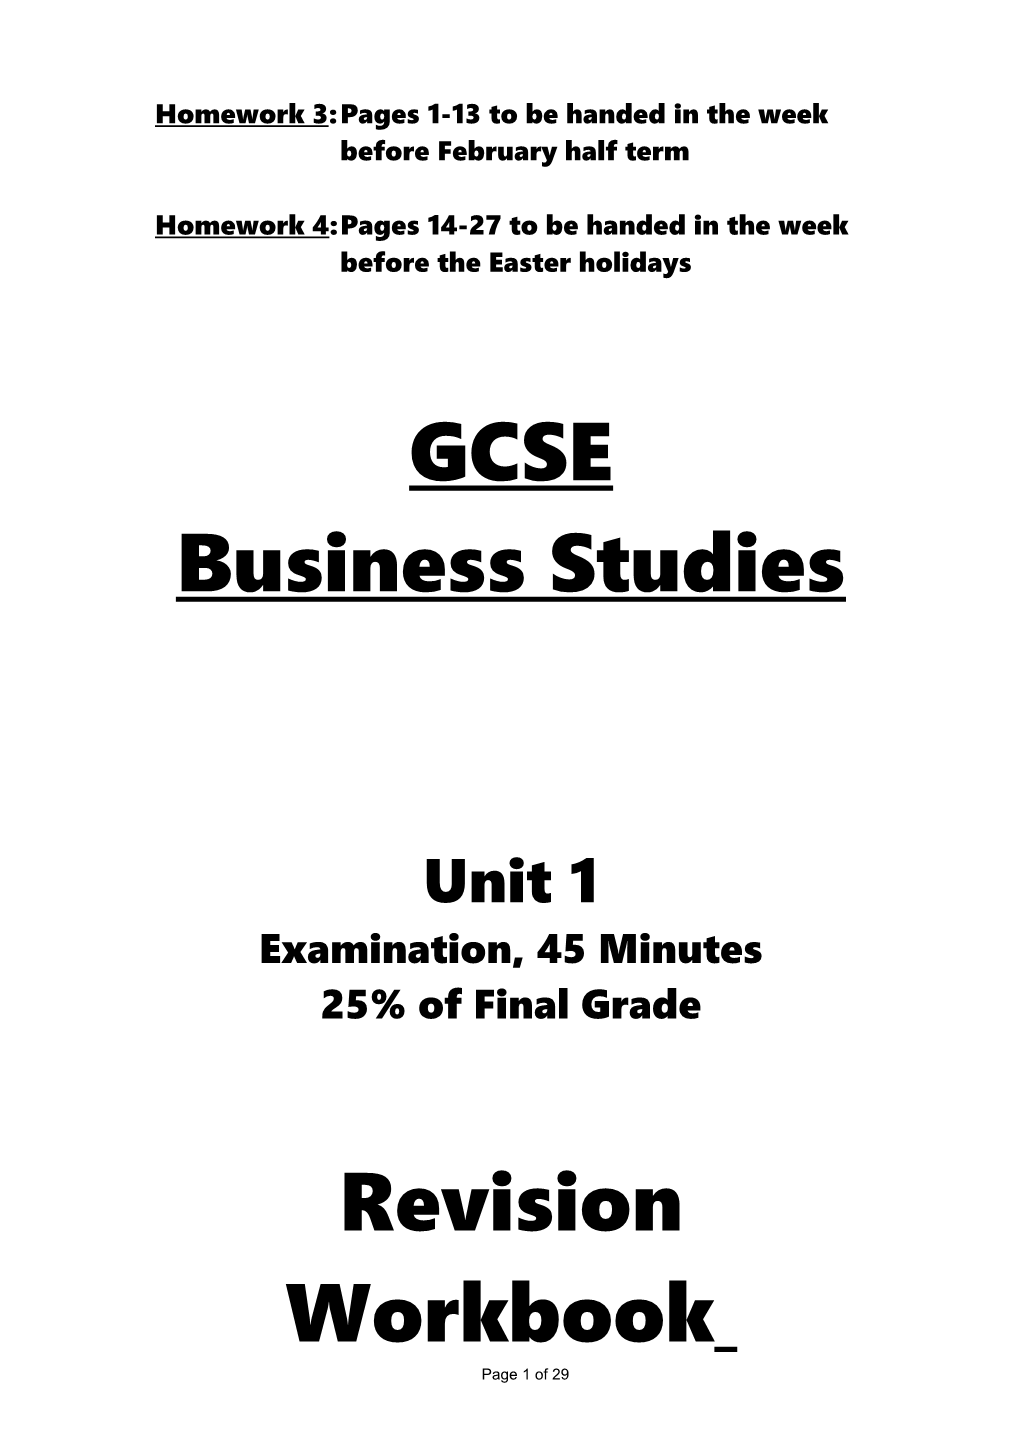 Homework 4:Pages 14-27 to Be Handed in the Week Before the Easter Holidays